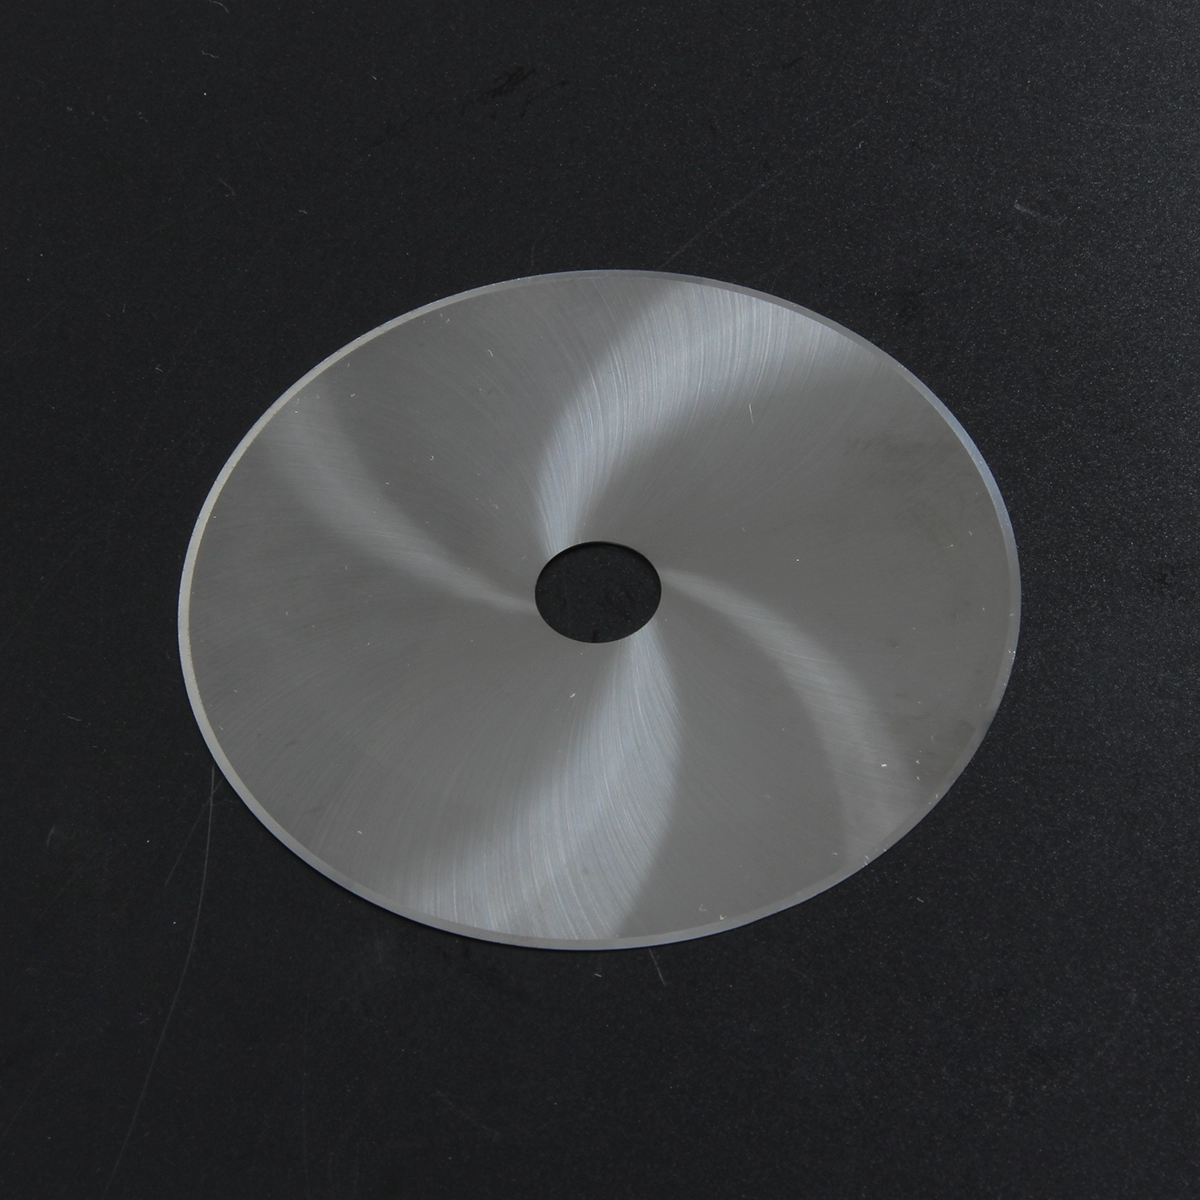 Best selling tobacco industrial carbide disk knife from licheng factory